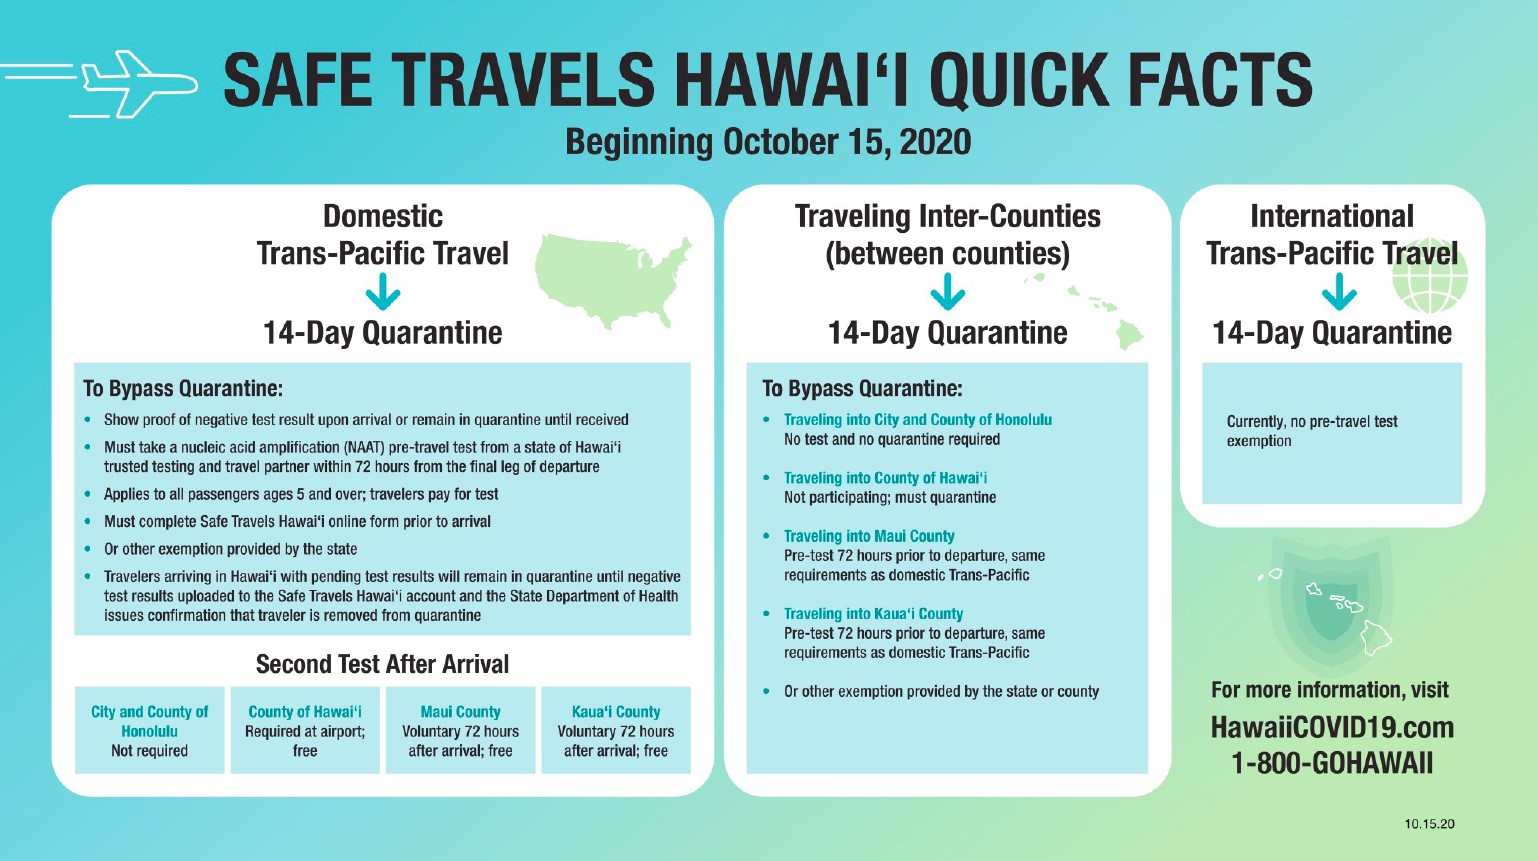 japan to hawaii travel requirements